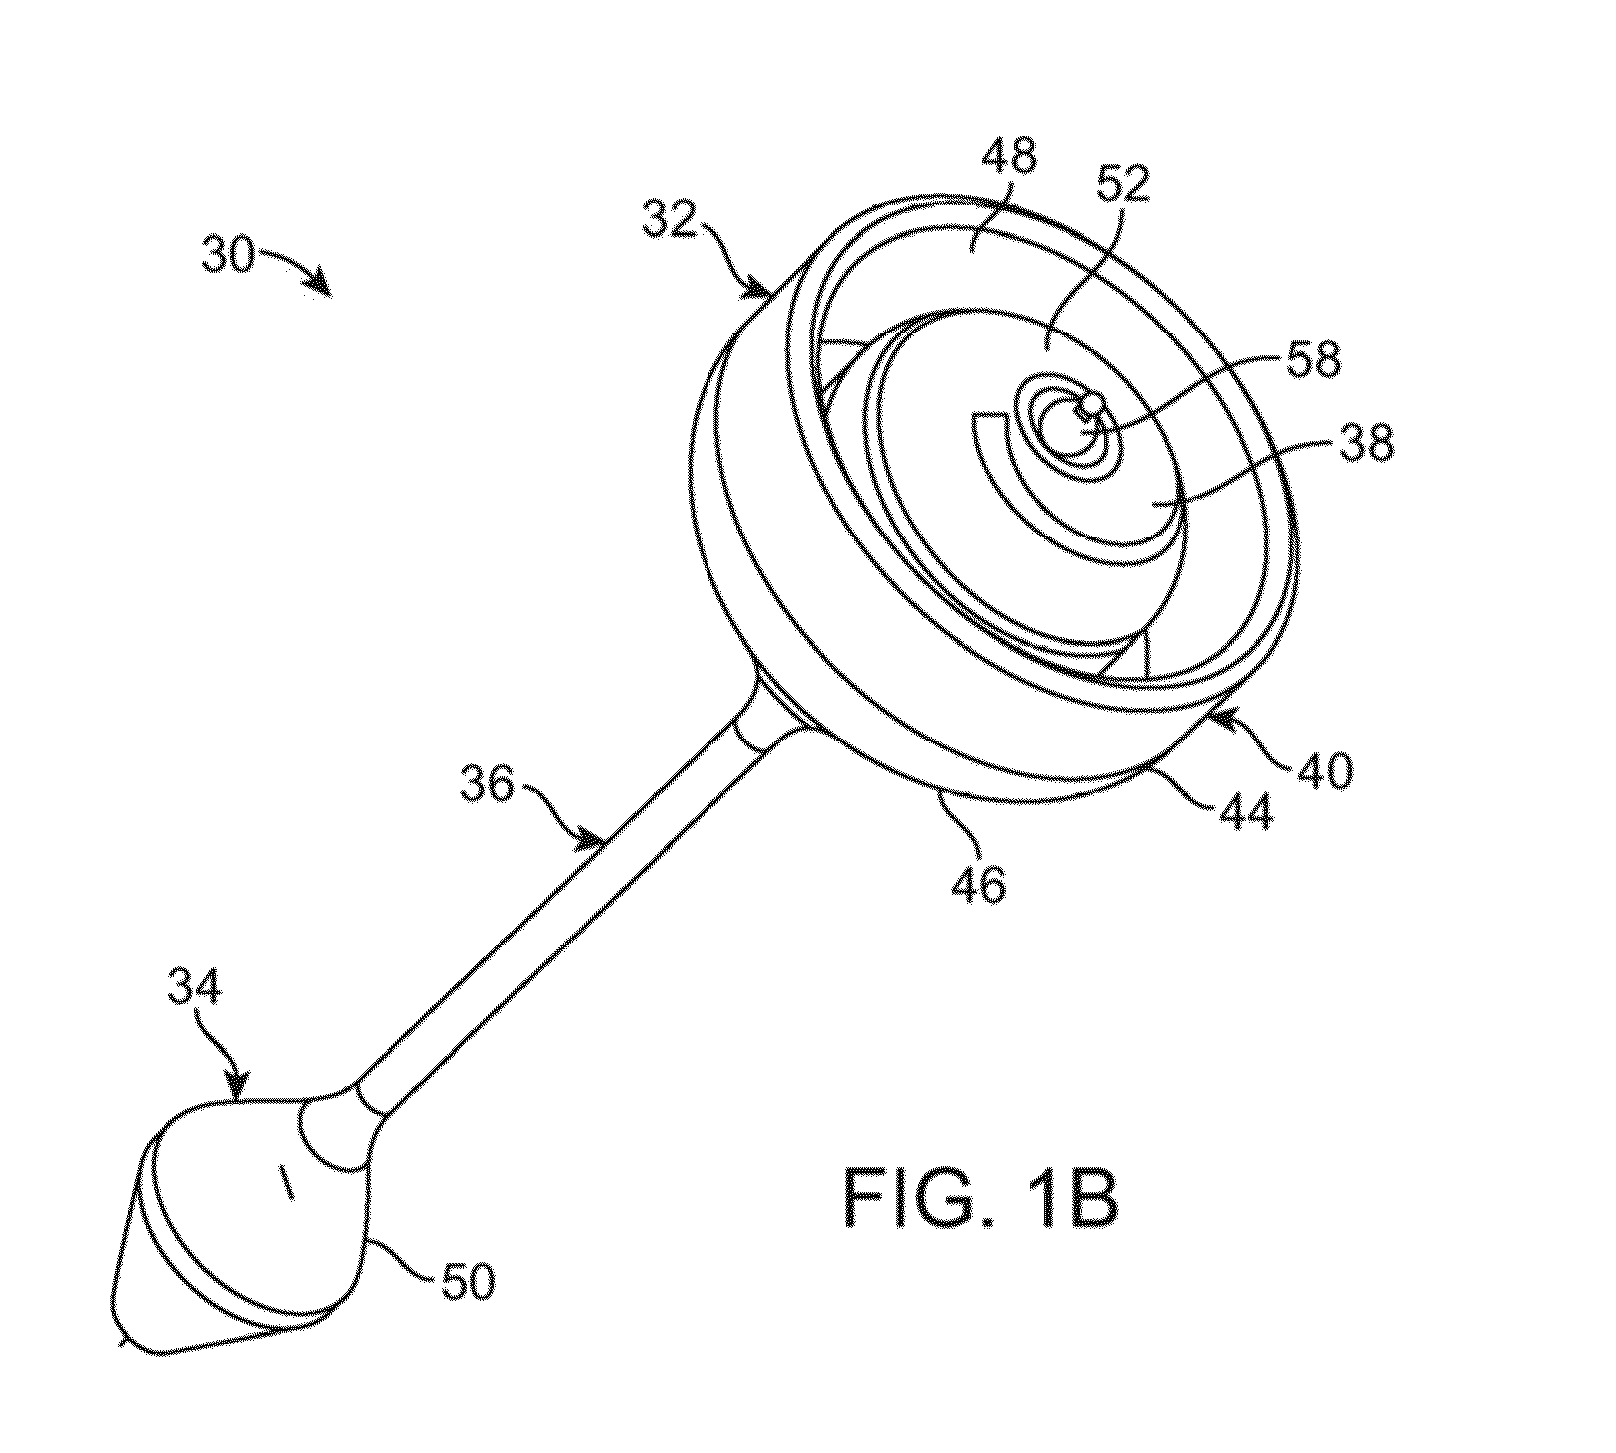 Locking gastric obstruction device and method of use